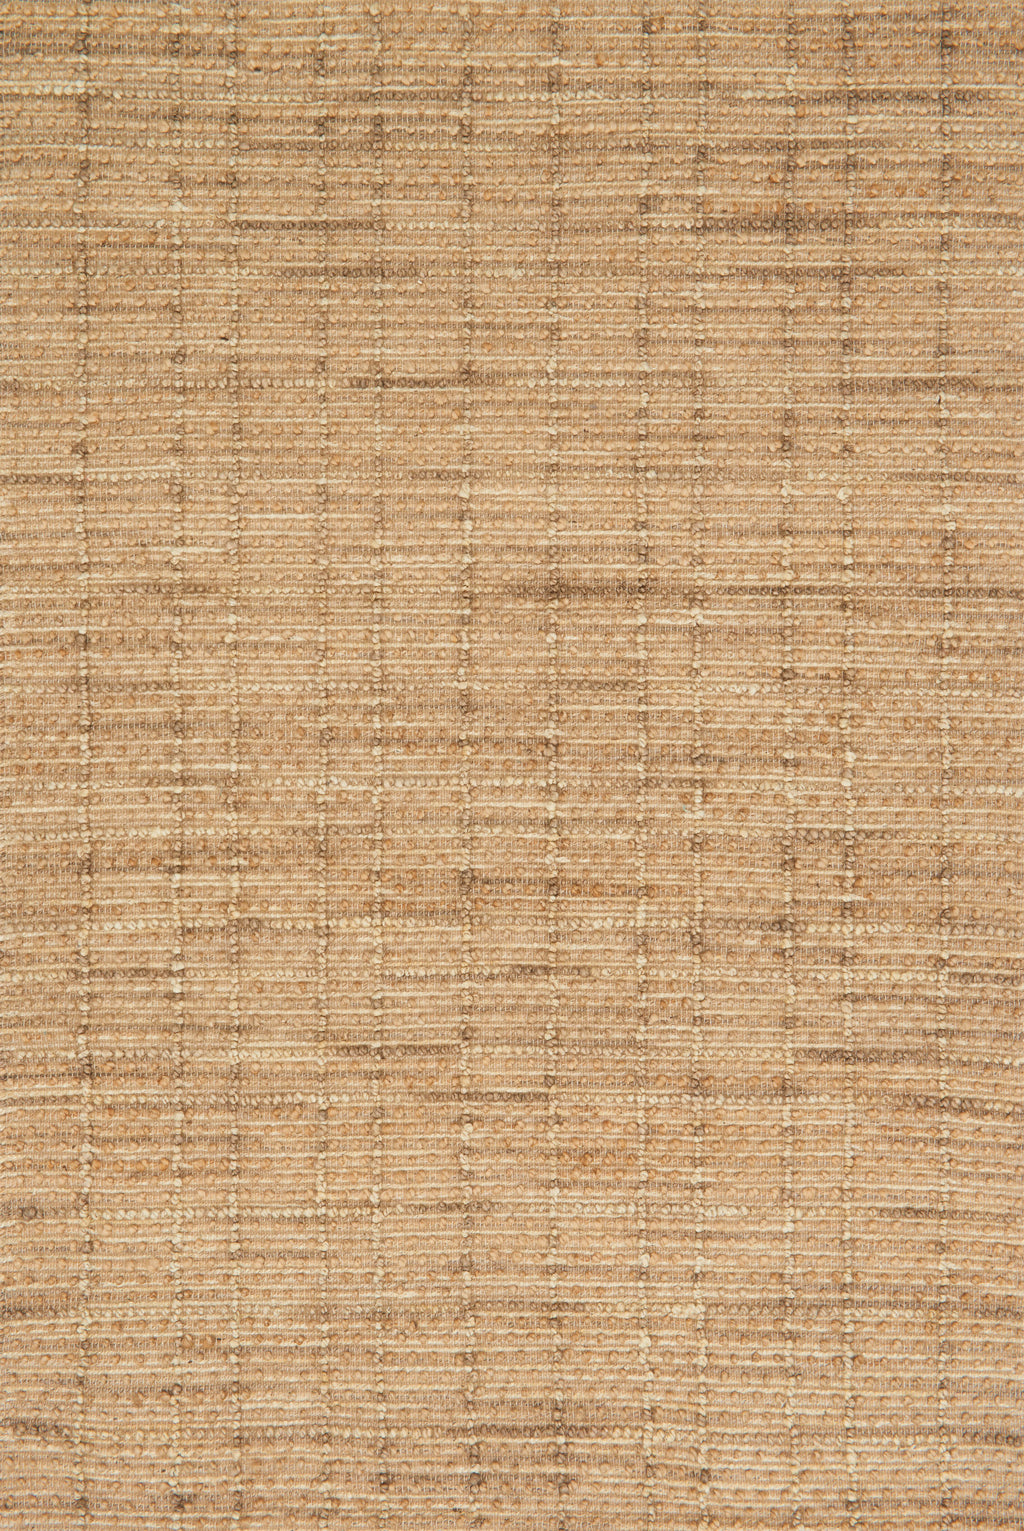 BEACON Collection Wool/Viscose Rug  in  NATURAL Beige Accent Hand-Woven Wool/Viscose